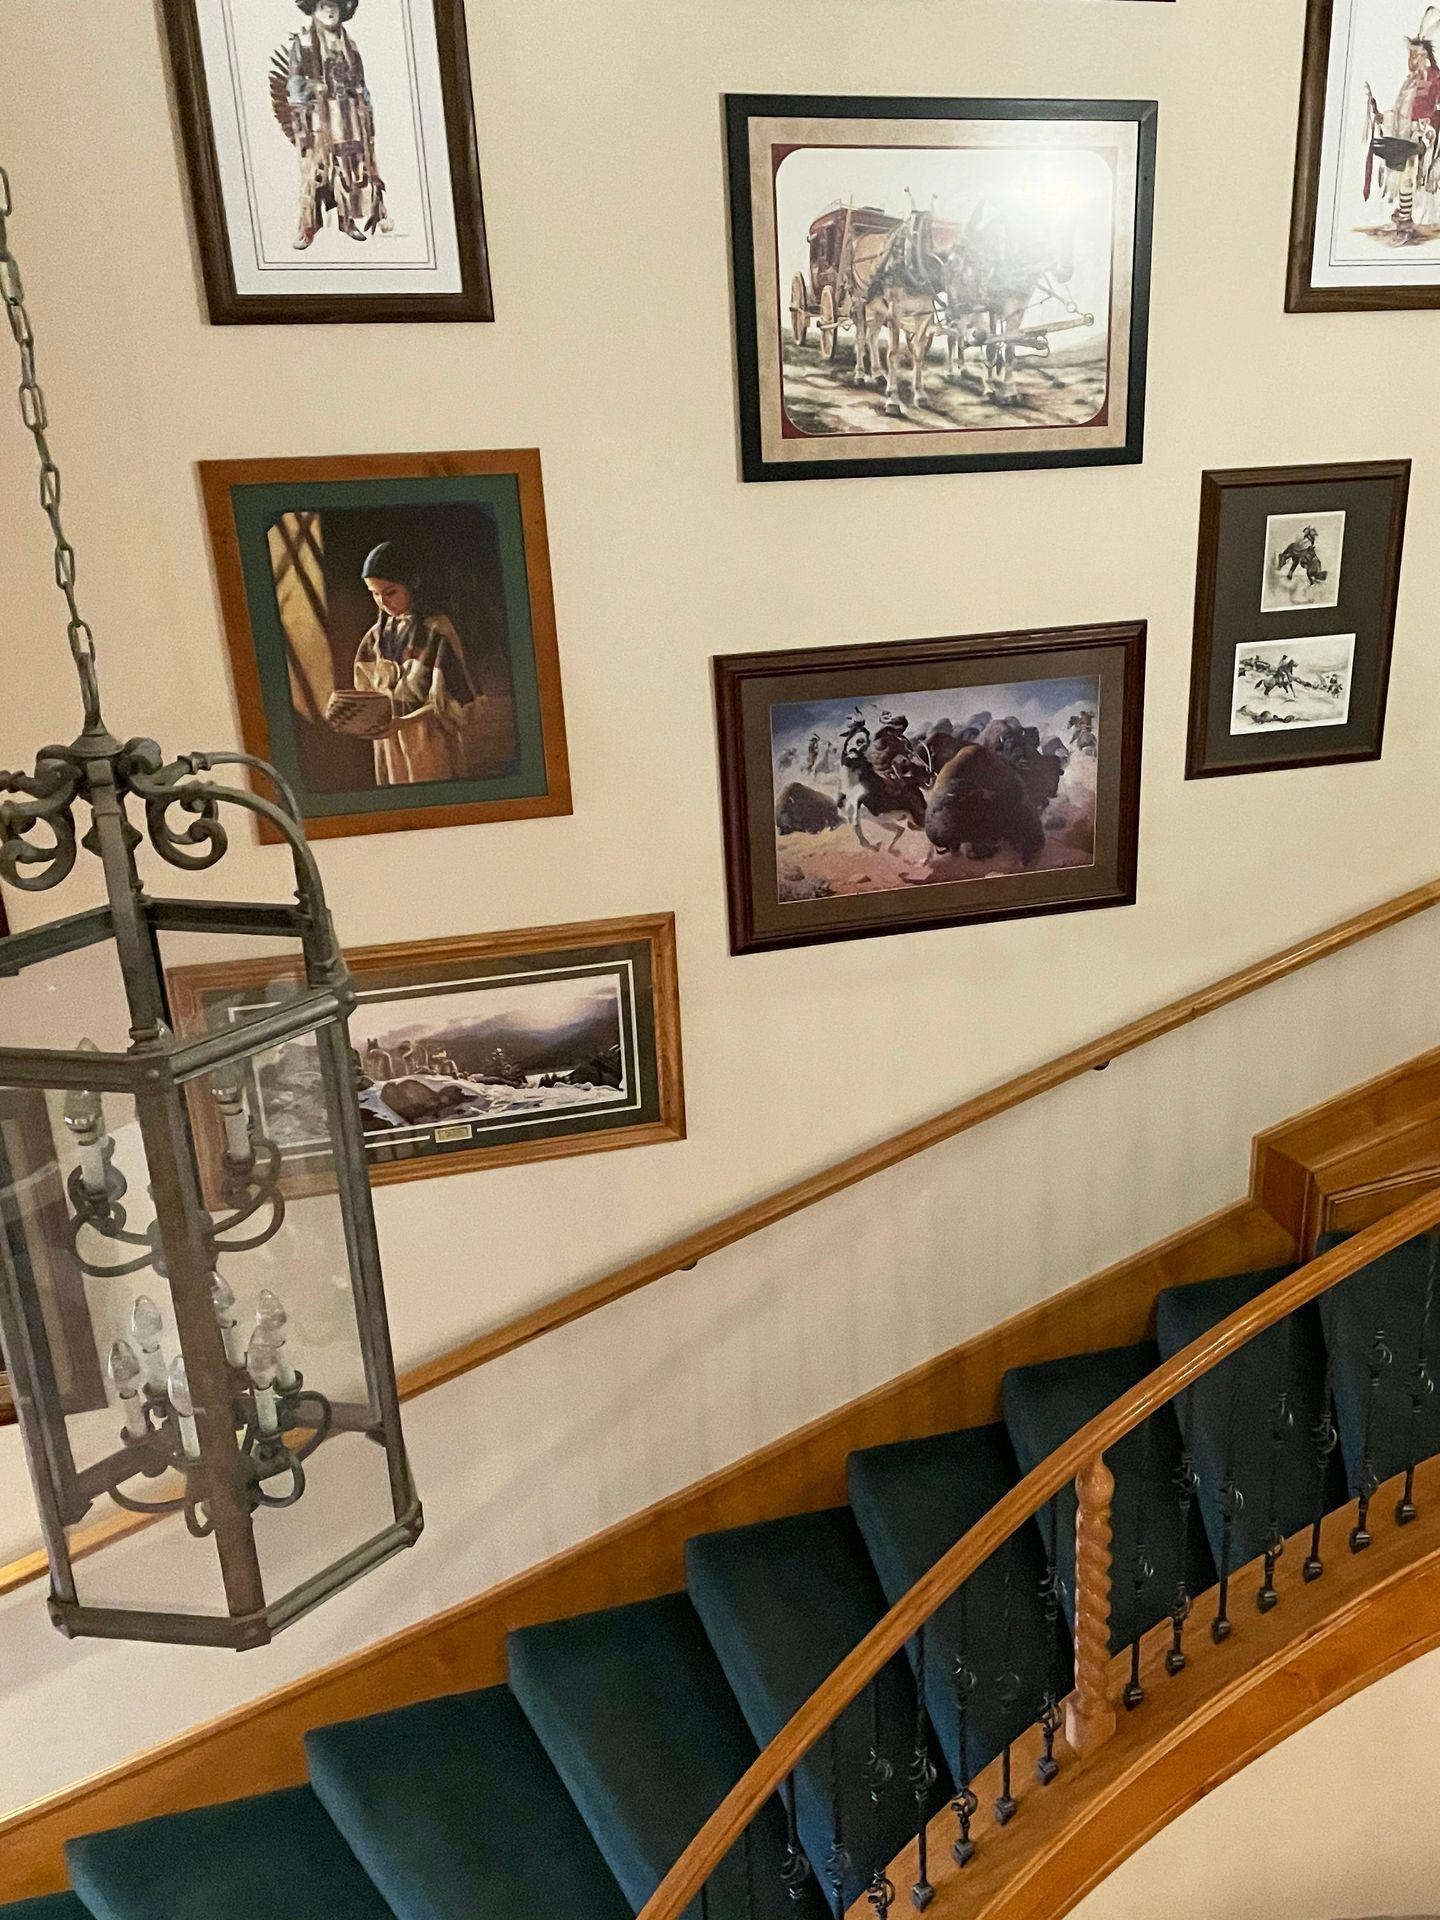 A staircase with artwork on the wall at the Snuggle Inn.